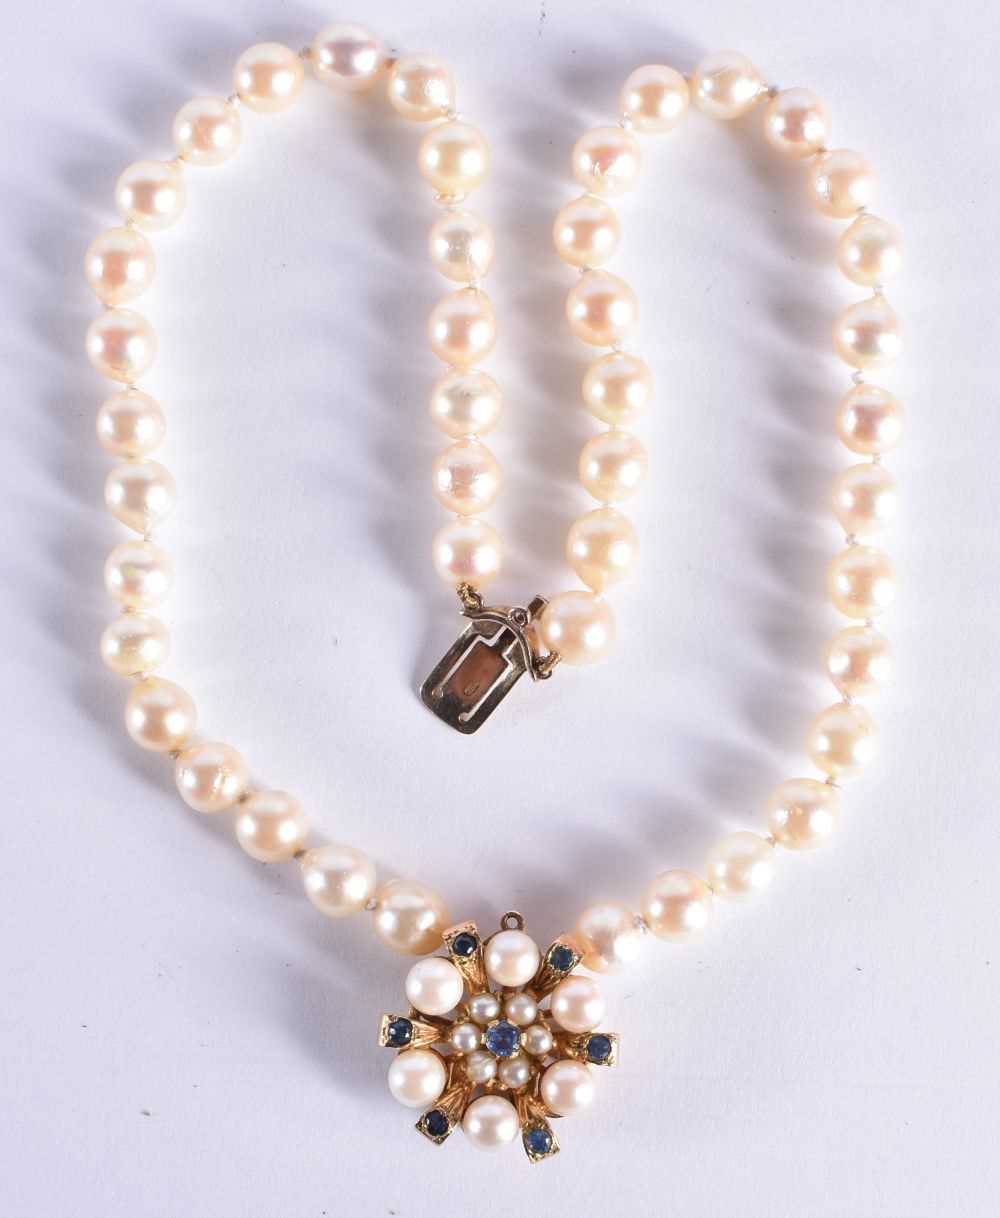 AN EDWARDIAN 9CT GOLD AND PEARL NECKLACE. 25 grams. 19 cm long.